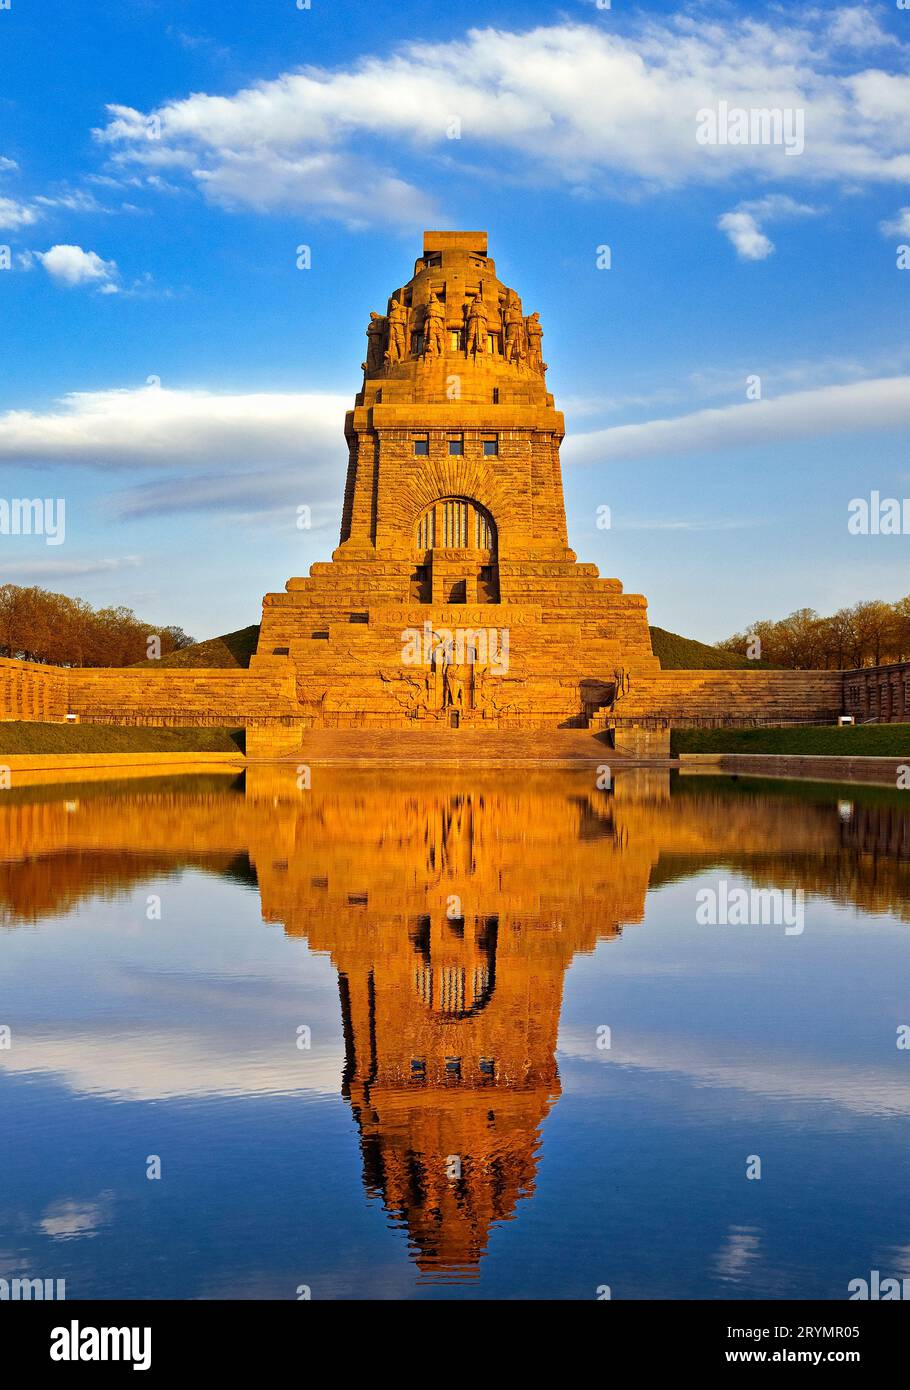 Monument to the Battle of the Nations in the evening light, Leipzig, Saxony, Germany, Europe Stock Photo